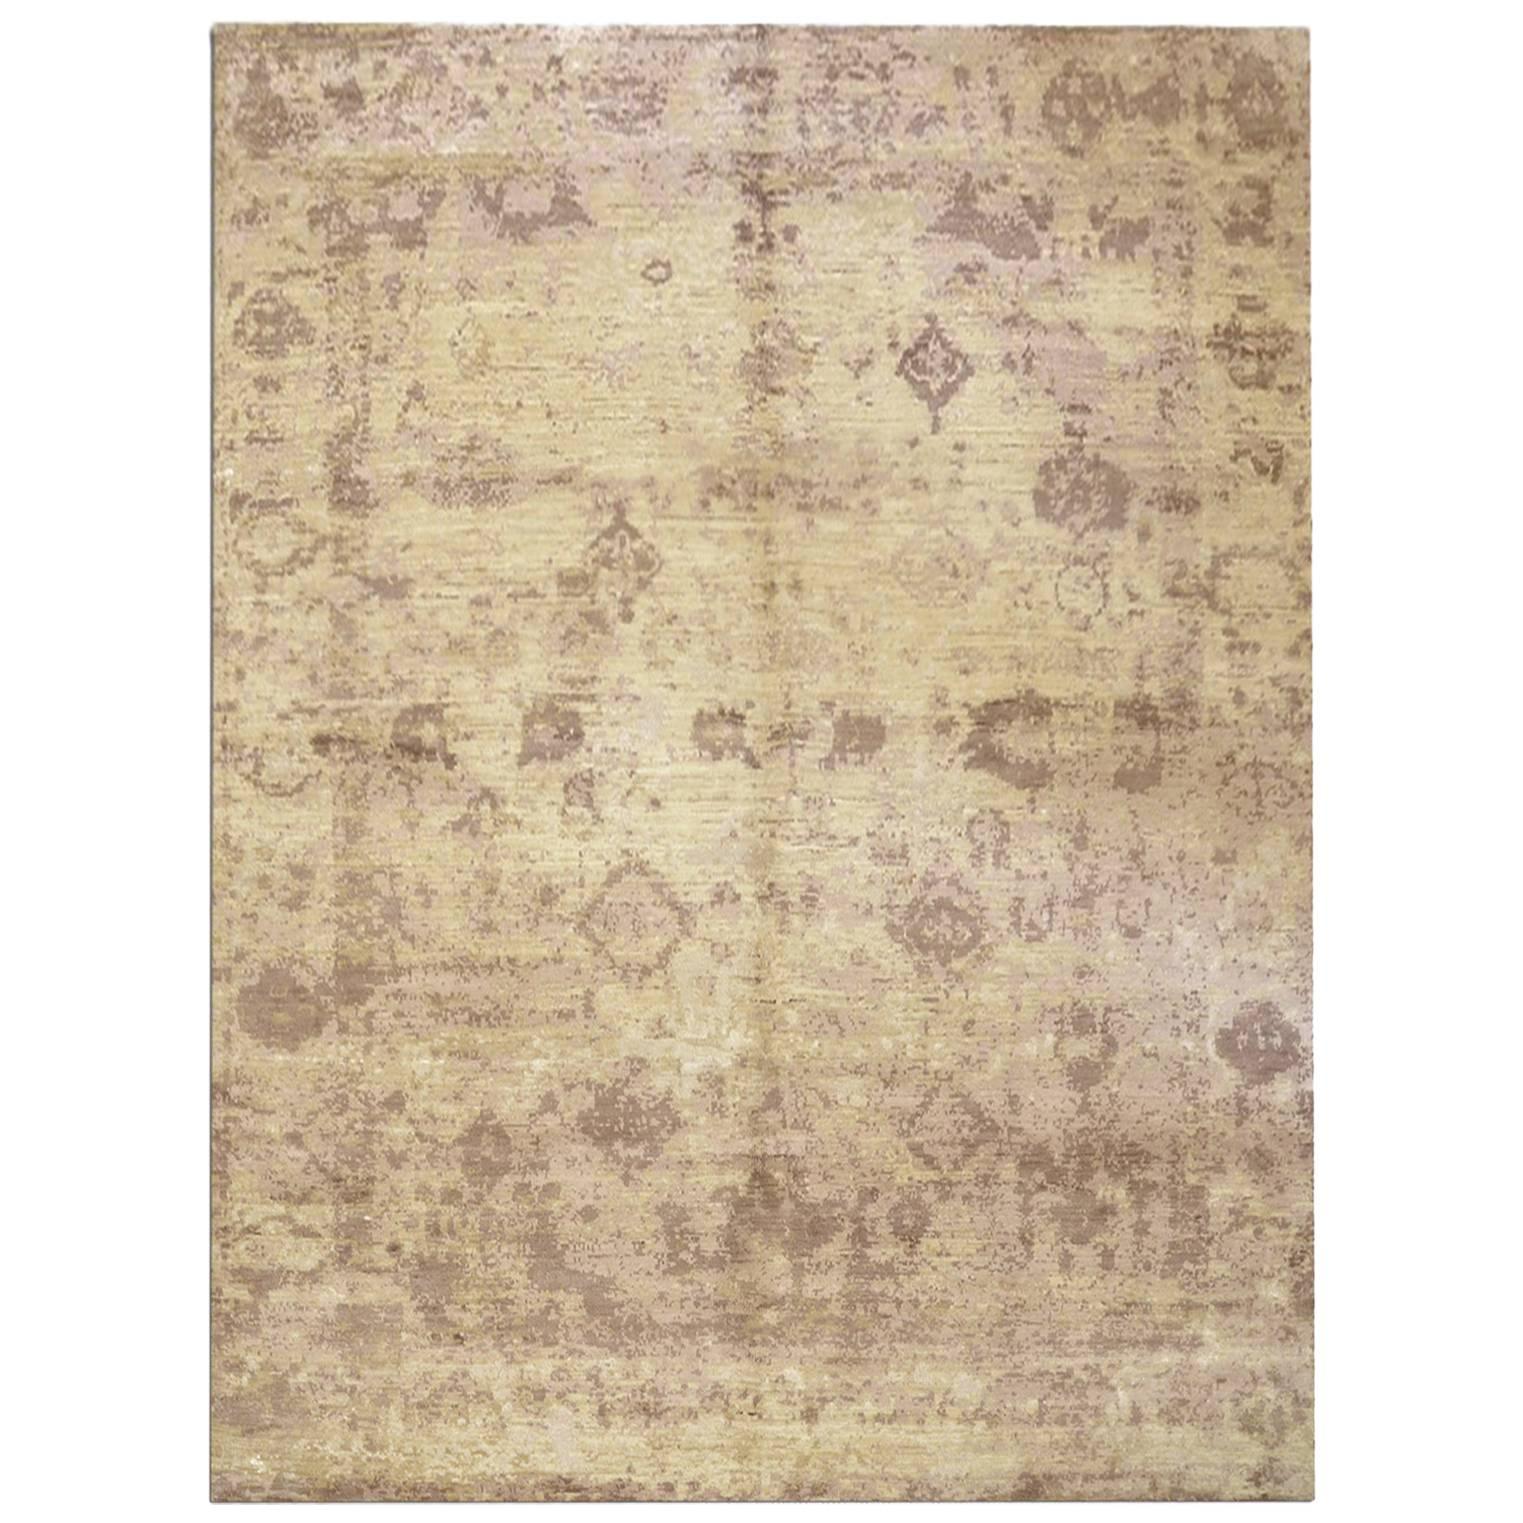 Contemporary Silk and Wool Rug, Abstract Design with Beige and Earth